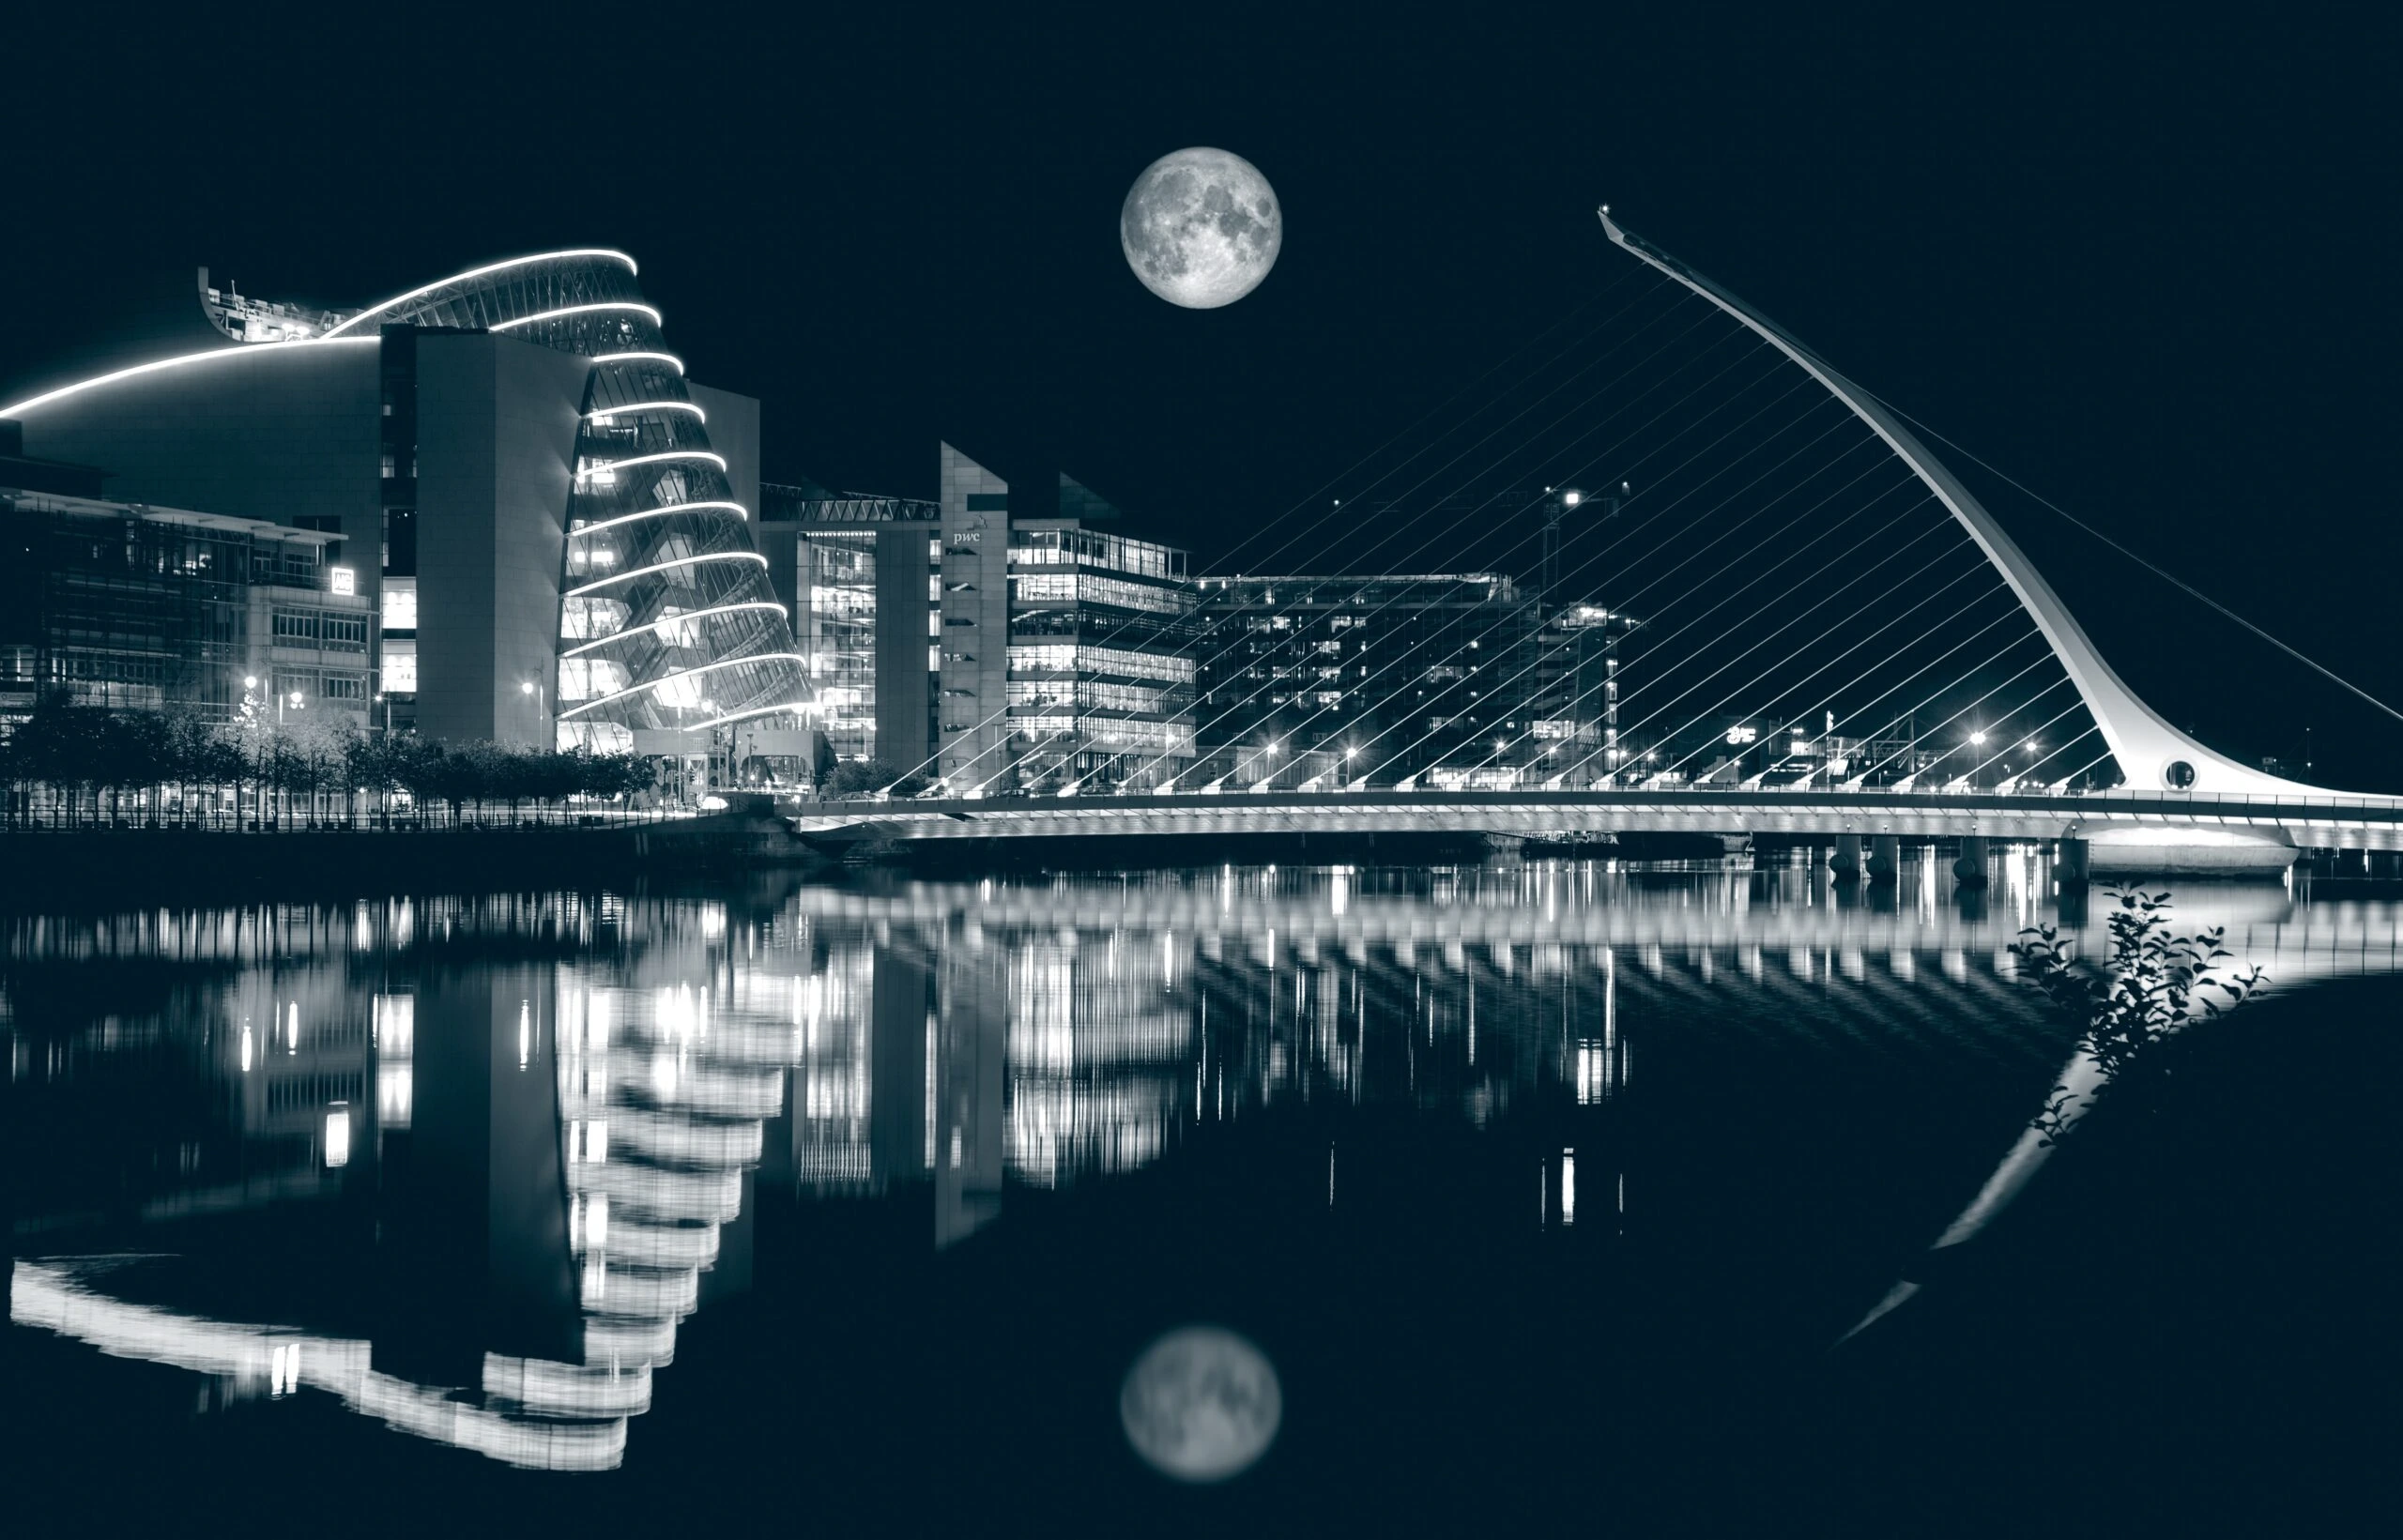 saad-chaudhry-Night with full moon over river Dublin-unsplash